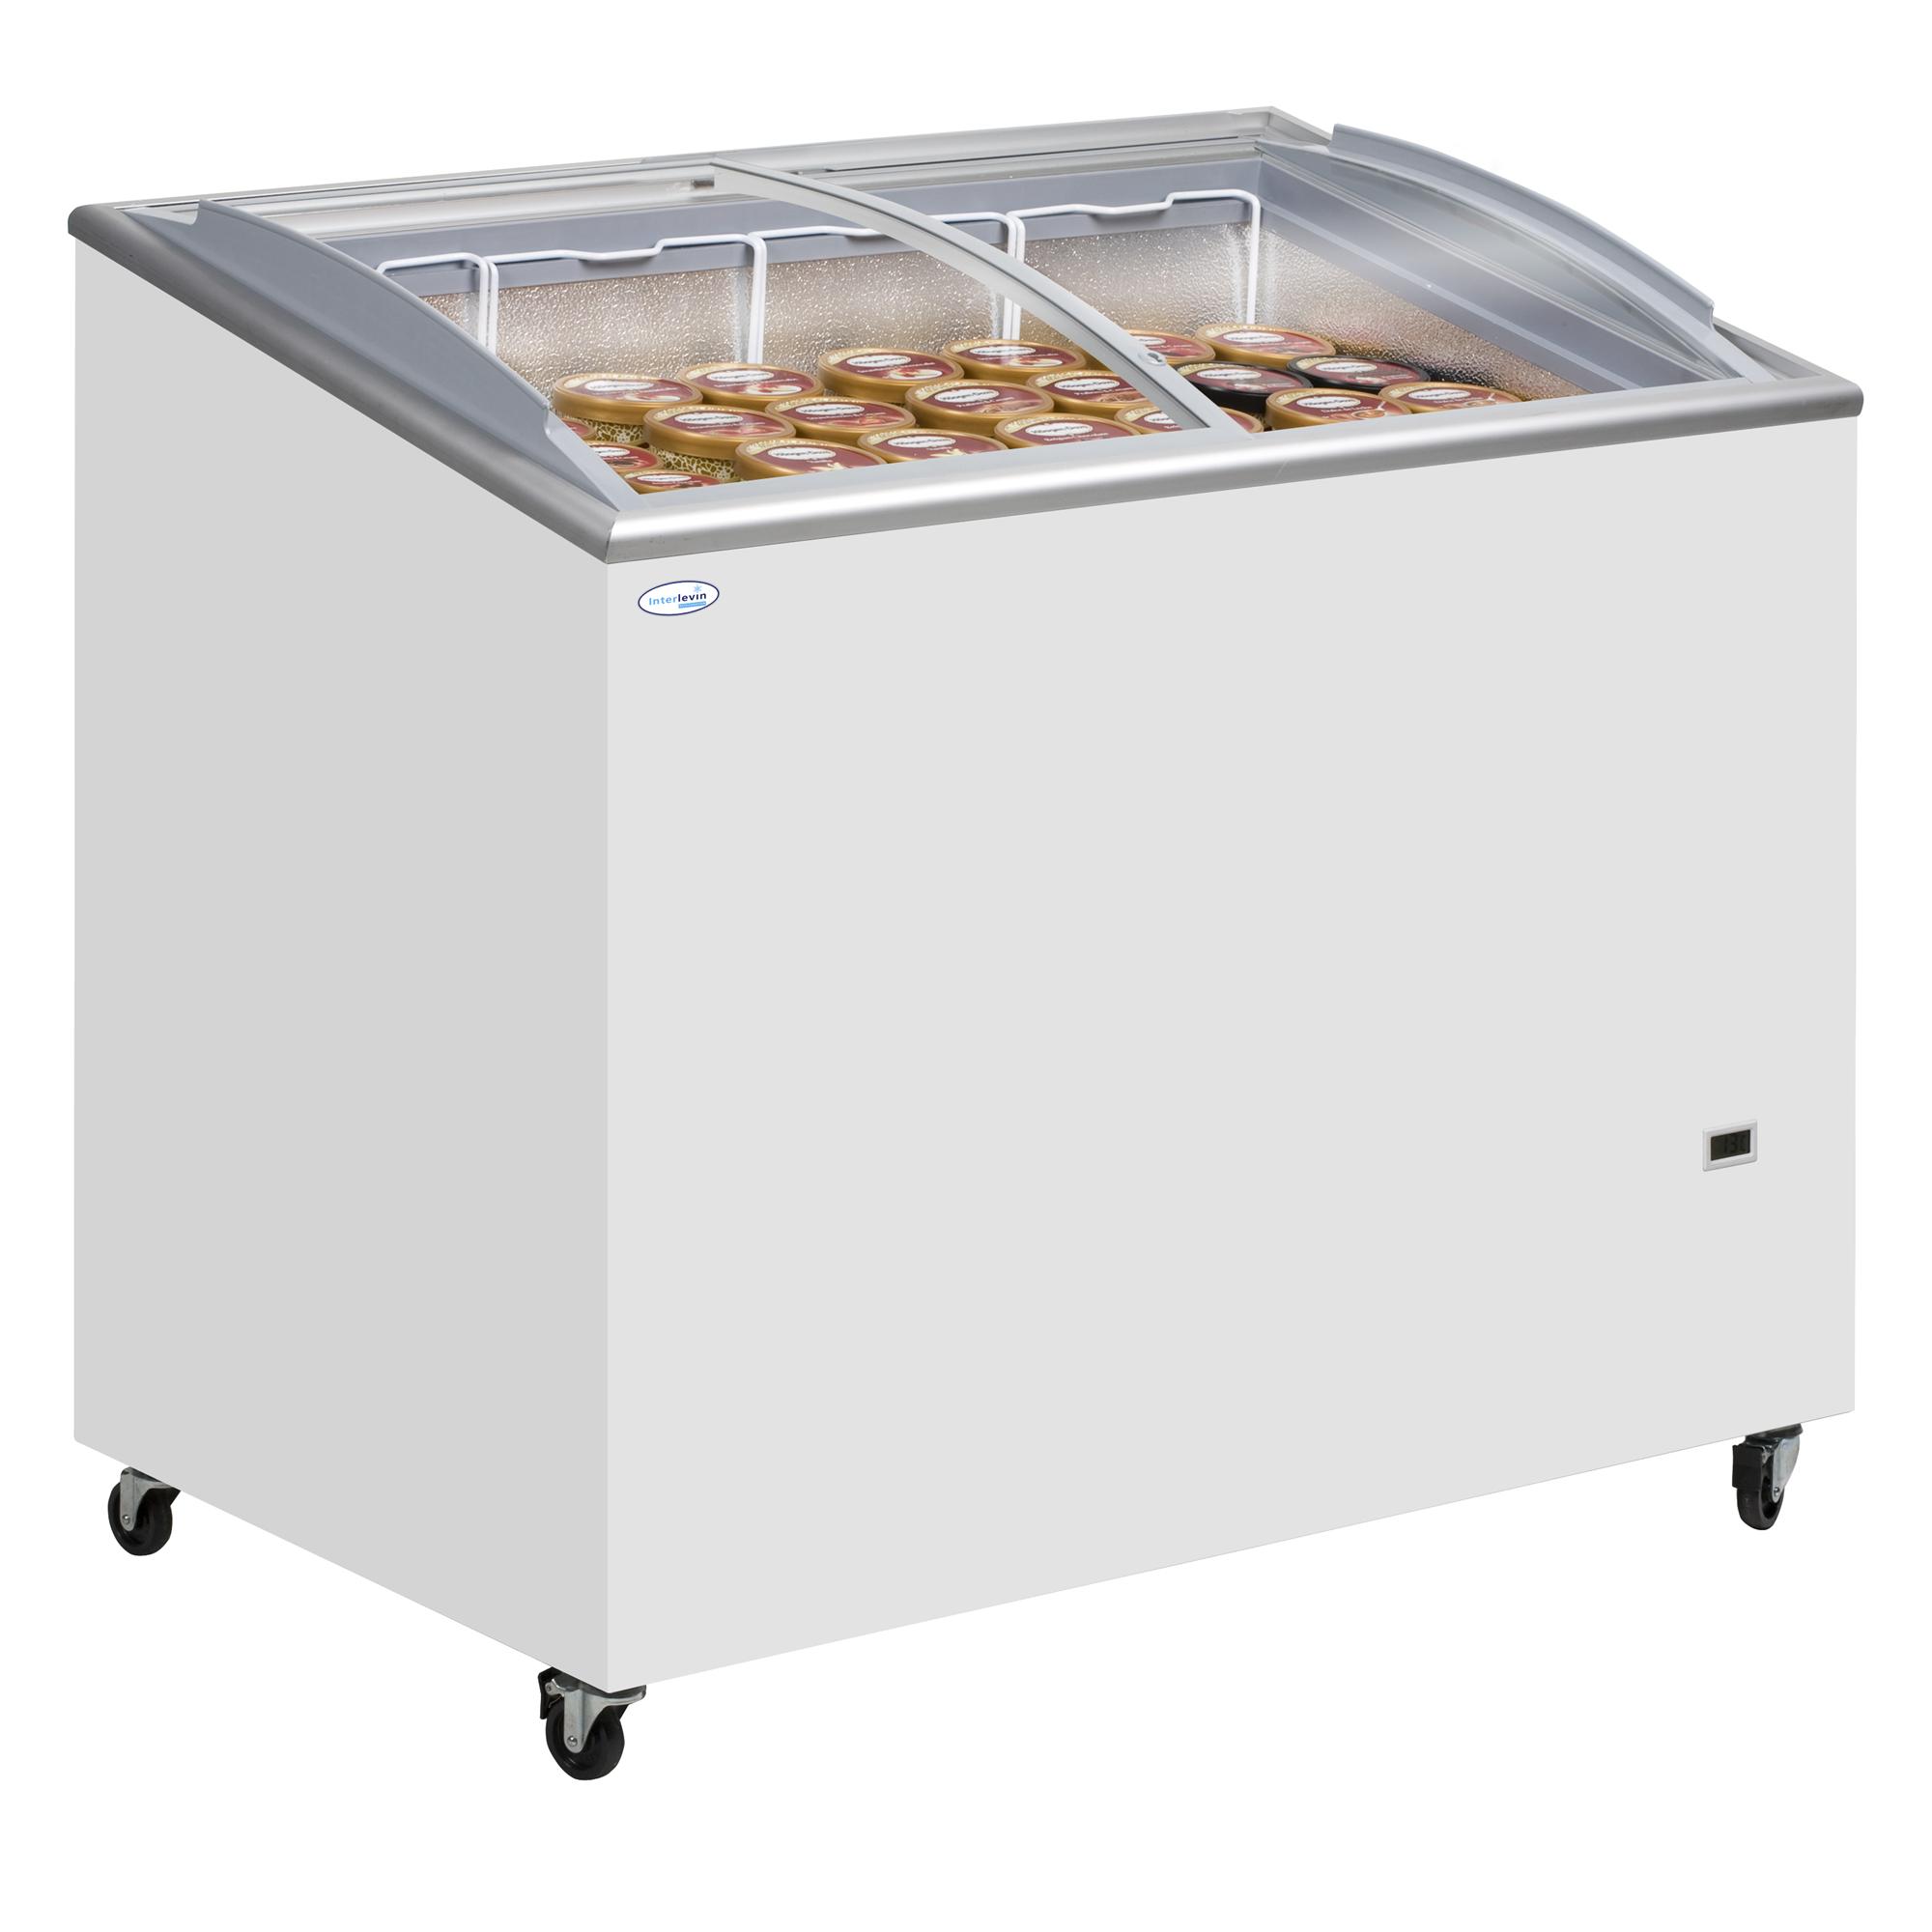 Sliding Curved and Angled Lid Chest Freezer